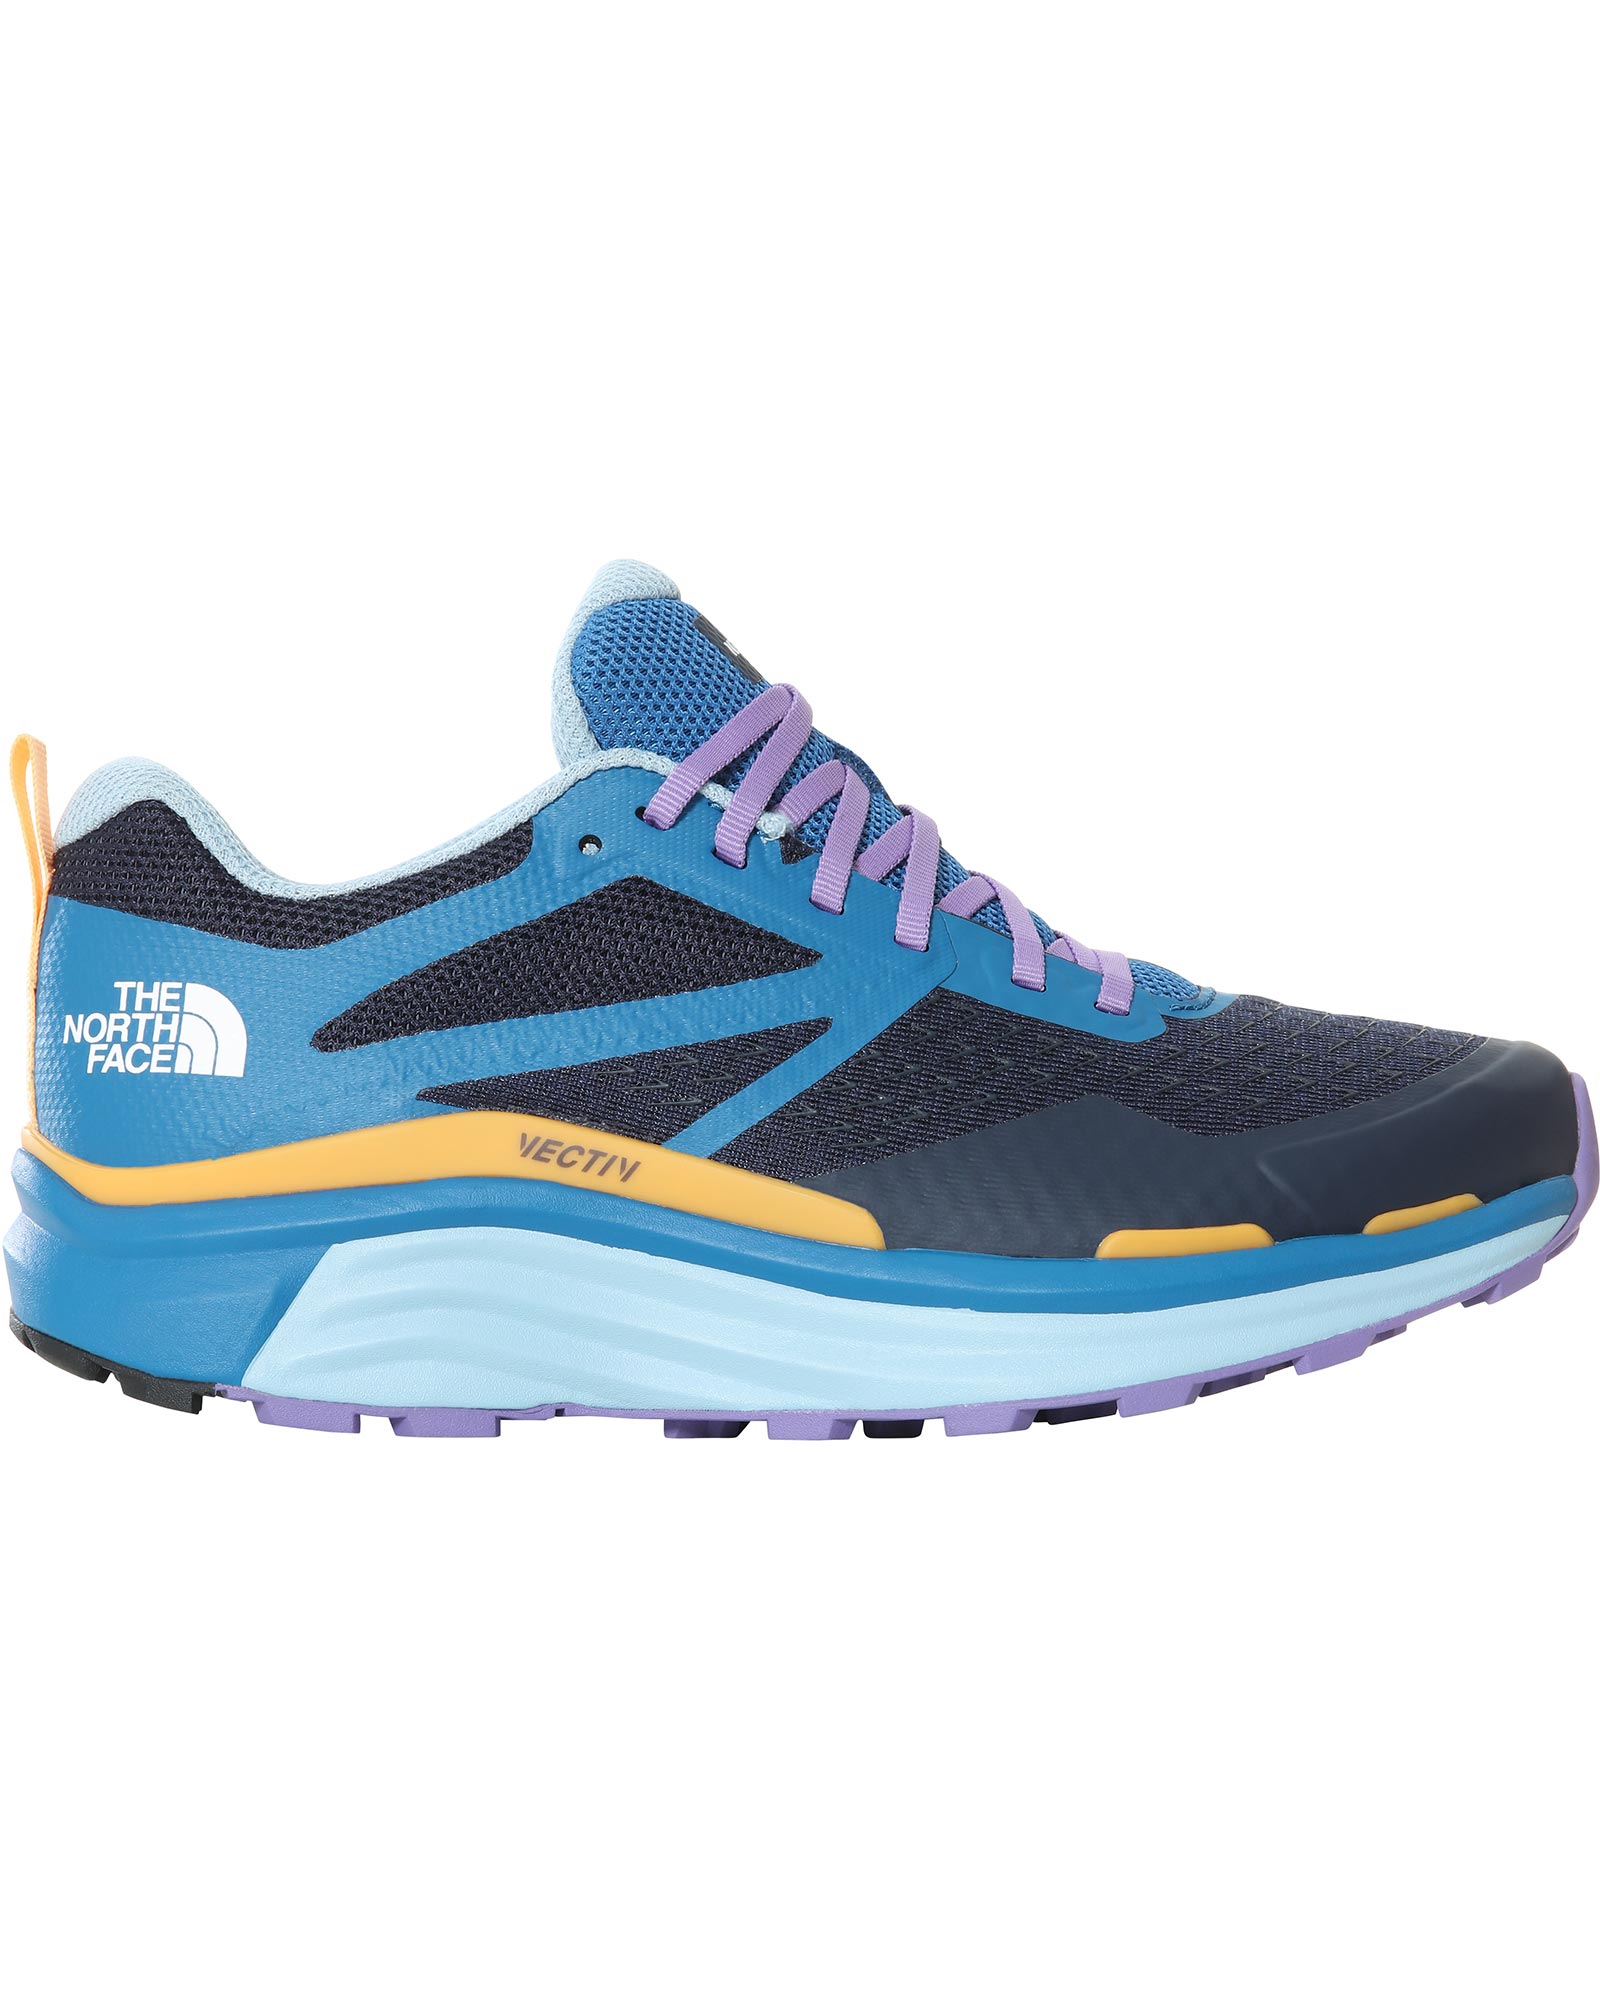 The North Face Vectiv Enduris Ii Womens Shoes